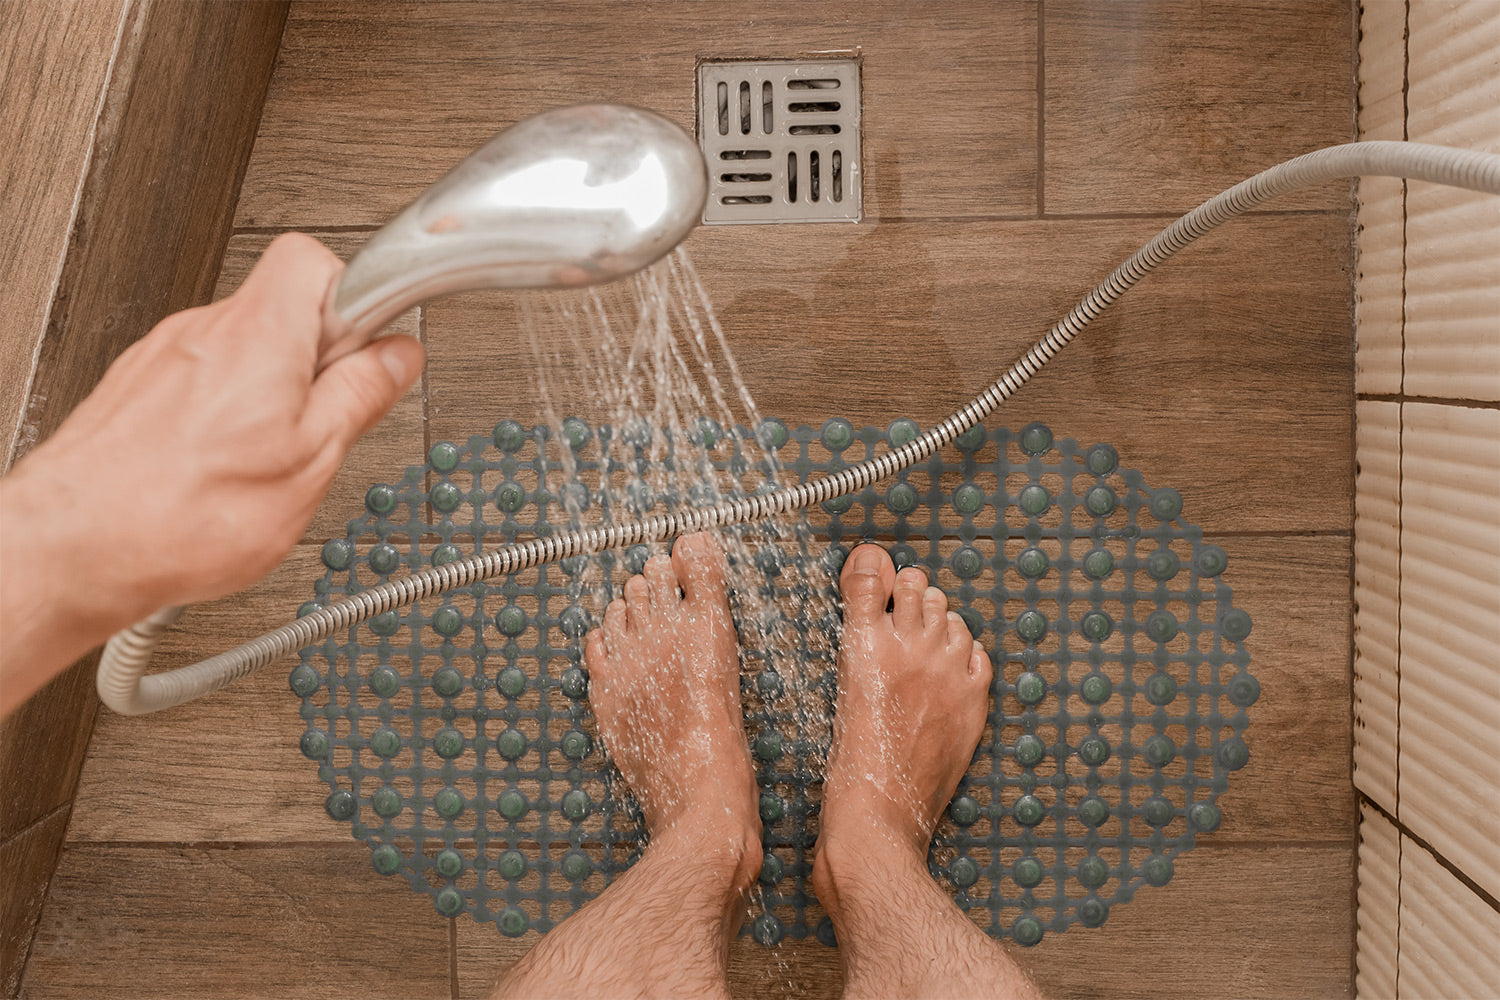 5 Easy Tips To Do a Men's Pedicure at Home